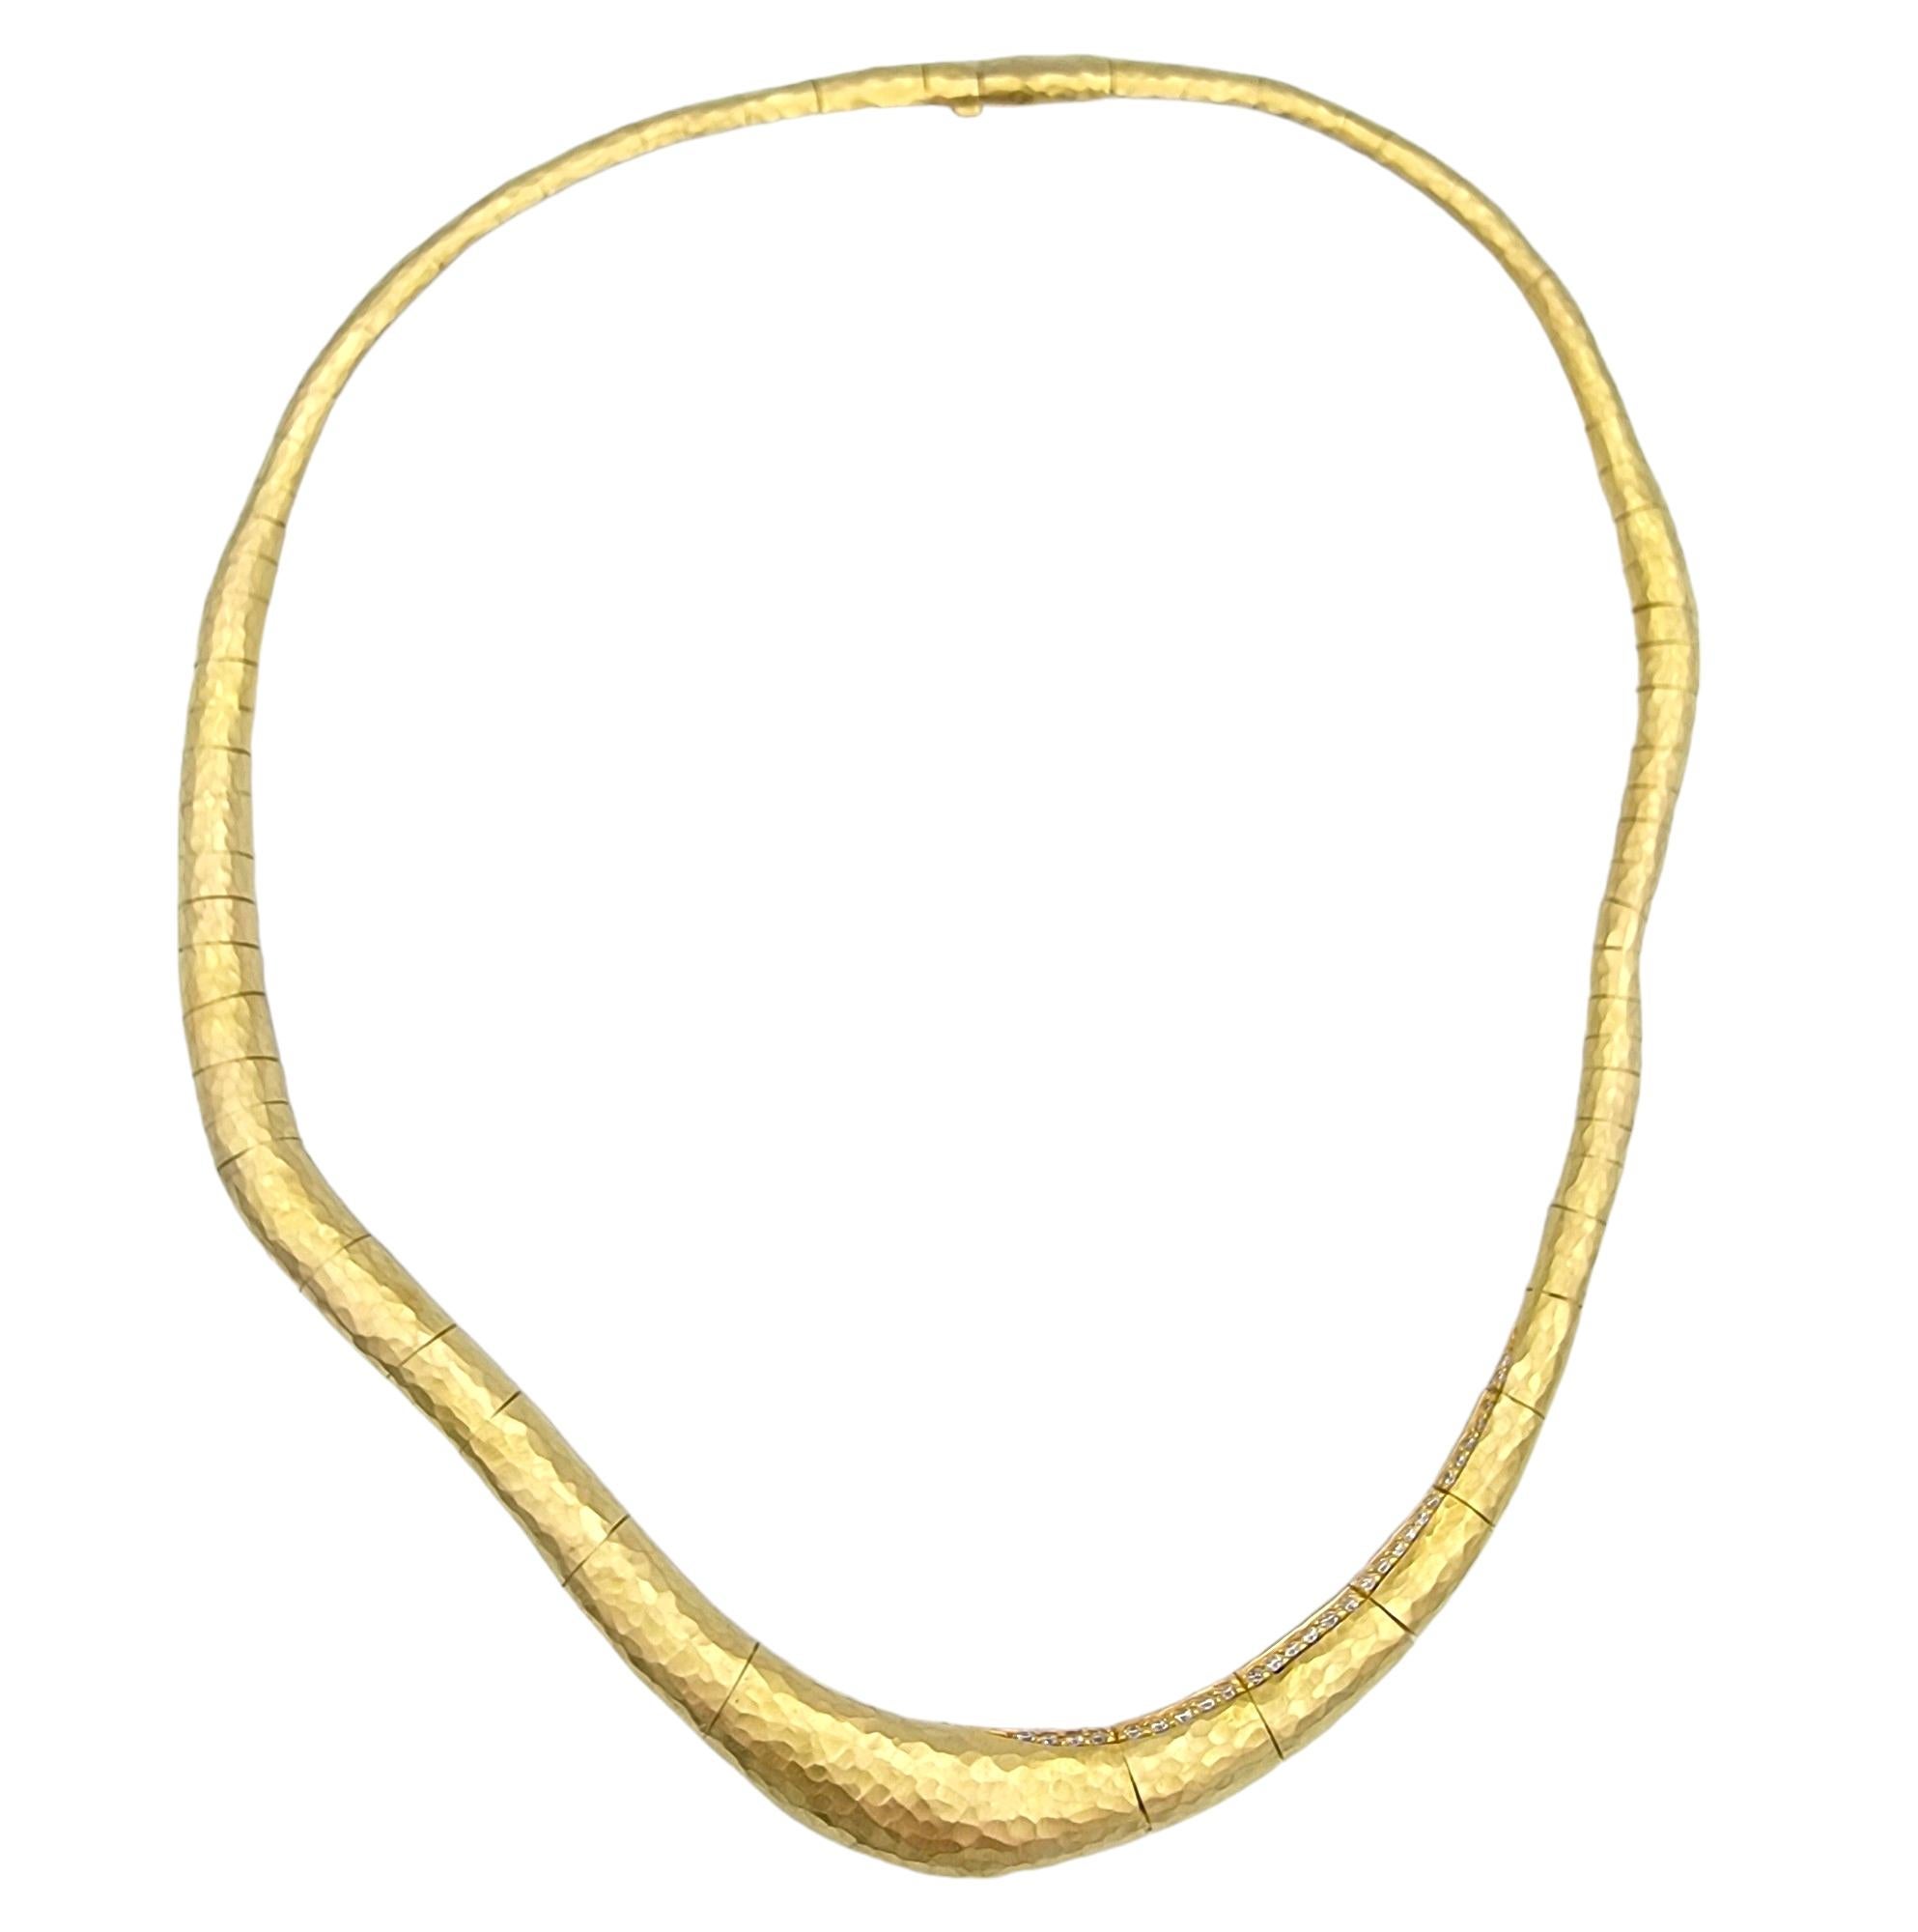 The H. Stern collar necklace, crafted in luxurious 18 karat yellow gold, exudes opulence and sophistication. Its unique design features a string of dazzling diamonds gracefully set along the collar, adding a touch of glamour and elegance to the